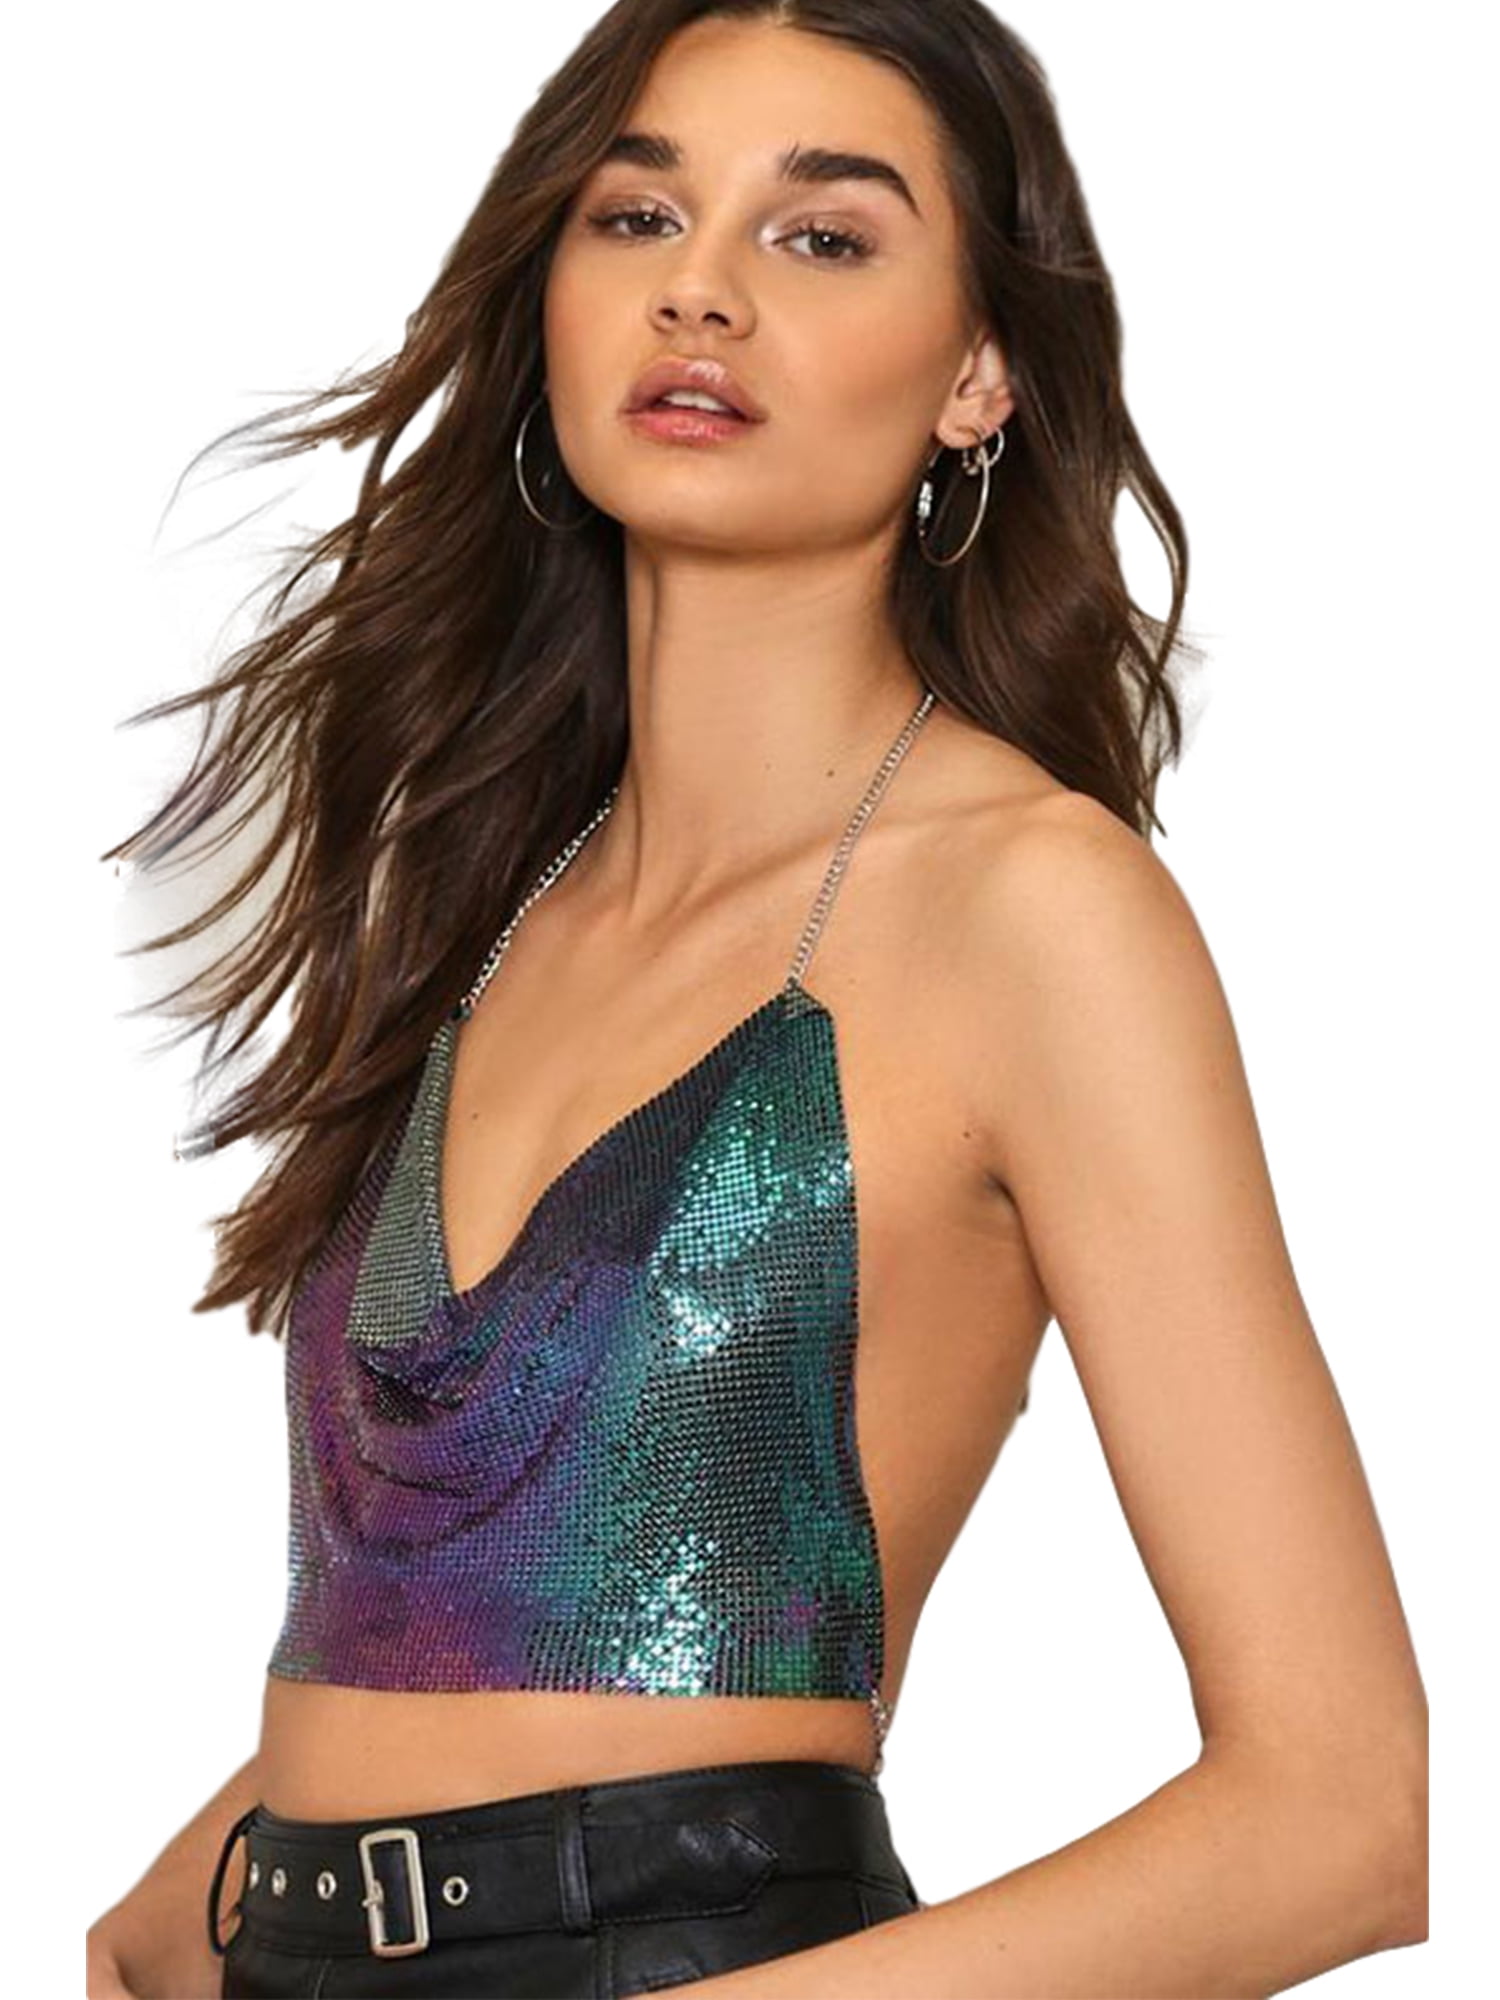 sequin top backless